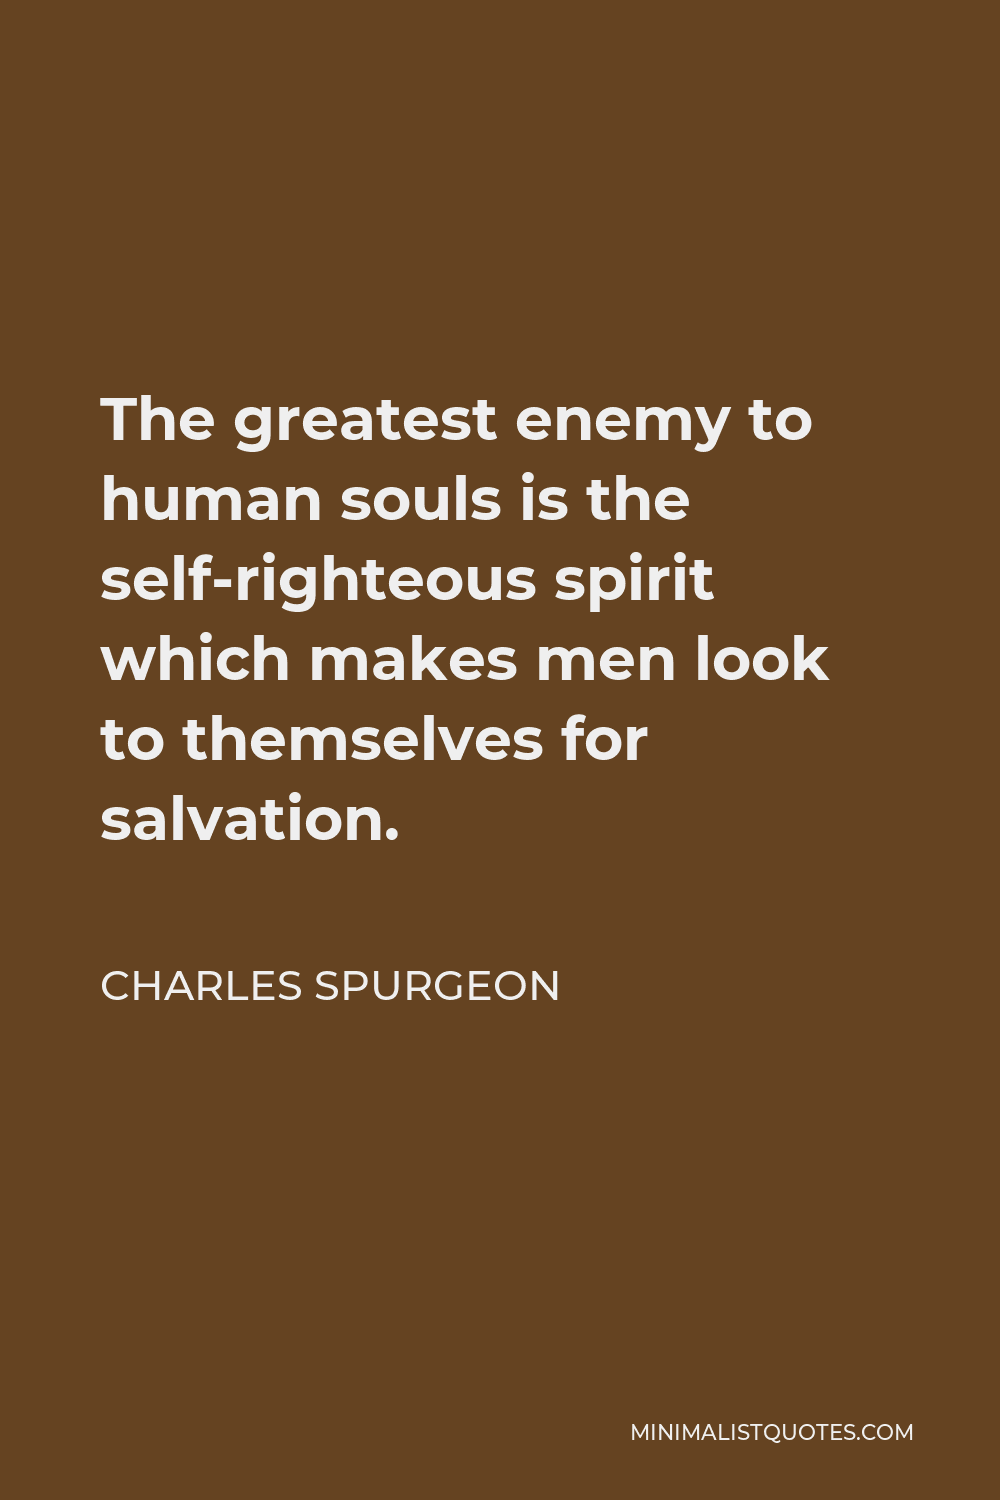 Charles Spurgeon Quote - The greatest enemy to human souls is the self-righteous spirit which makes men look to themselves for salvation.